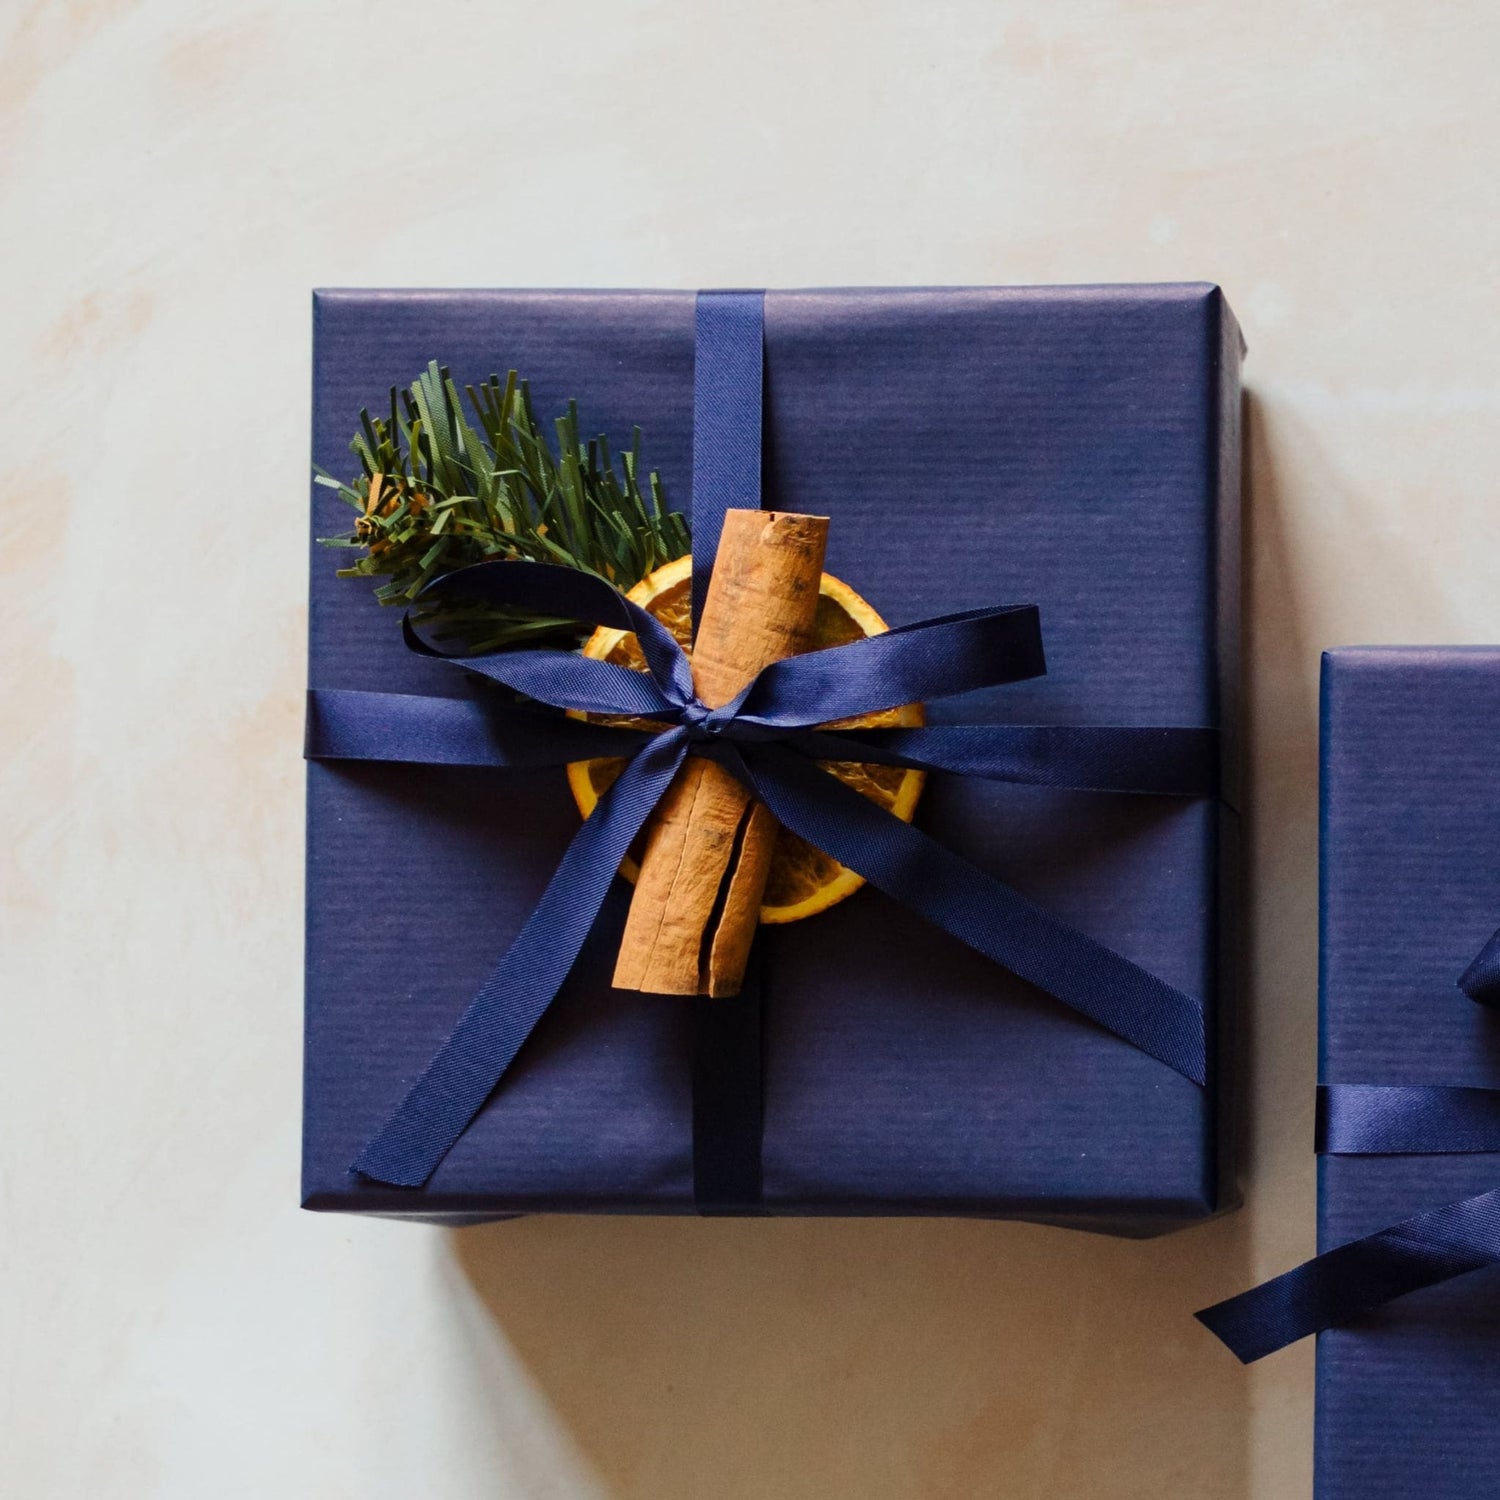 A 400g prosecco scented 3 wick soy candle from the Home County Co. is shown with luxury Christmas Gift Wrap. The 3 wick candle is wrapped in luxury navy wrapping paper secured with navy ribbon and Christmas embellishments.